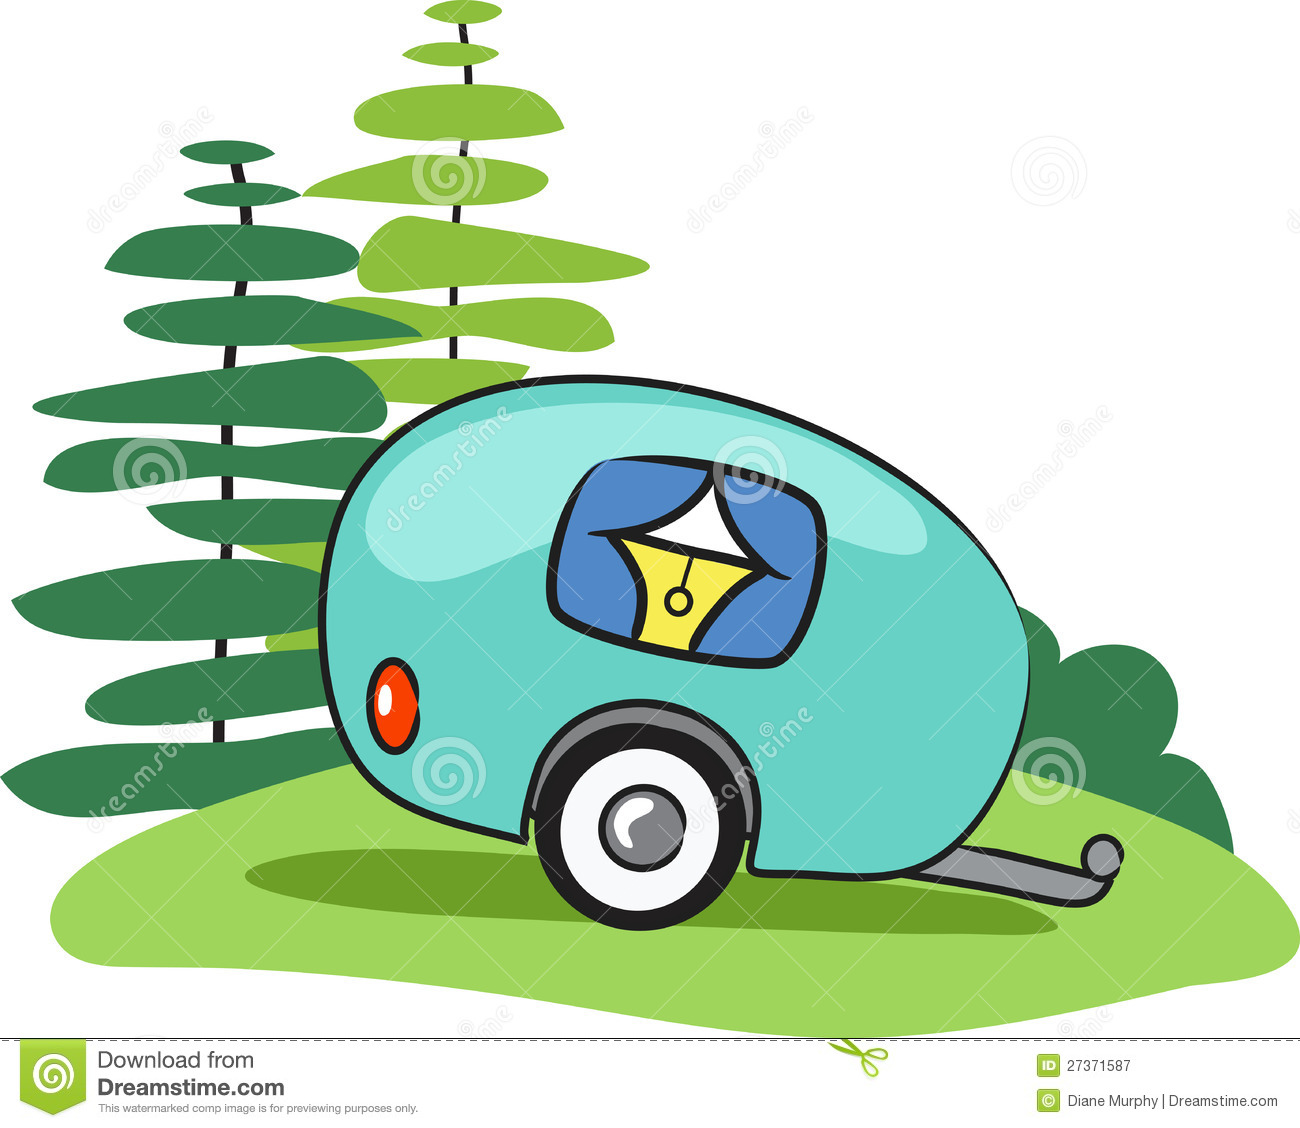 Collection of Camping clipart